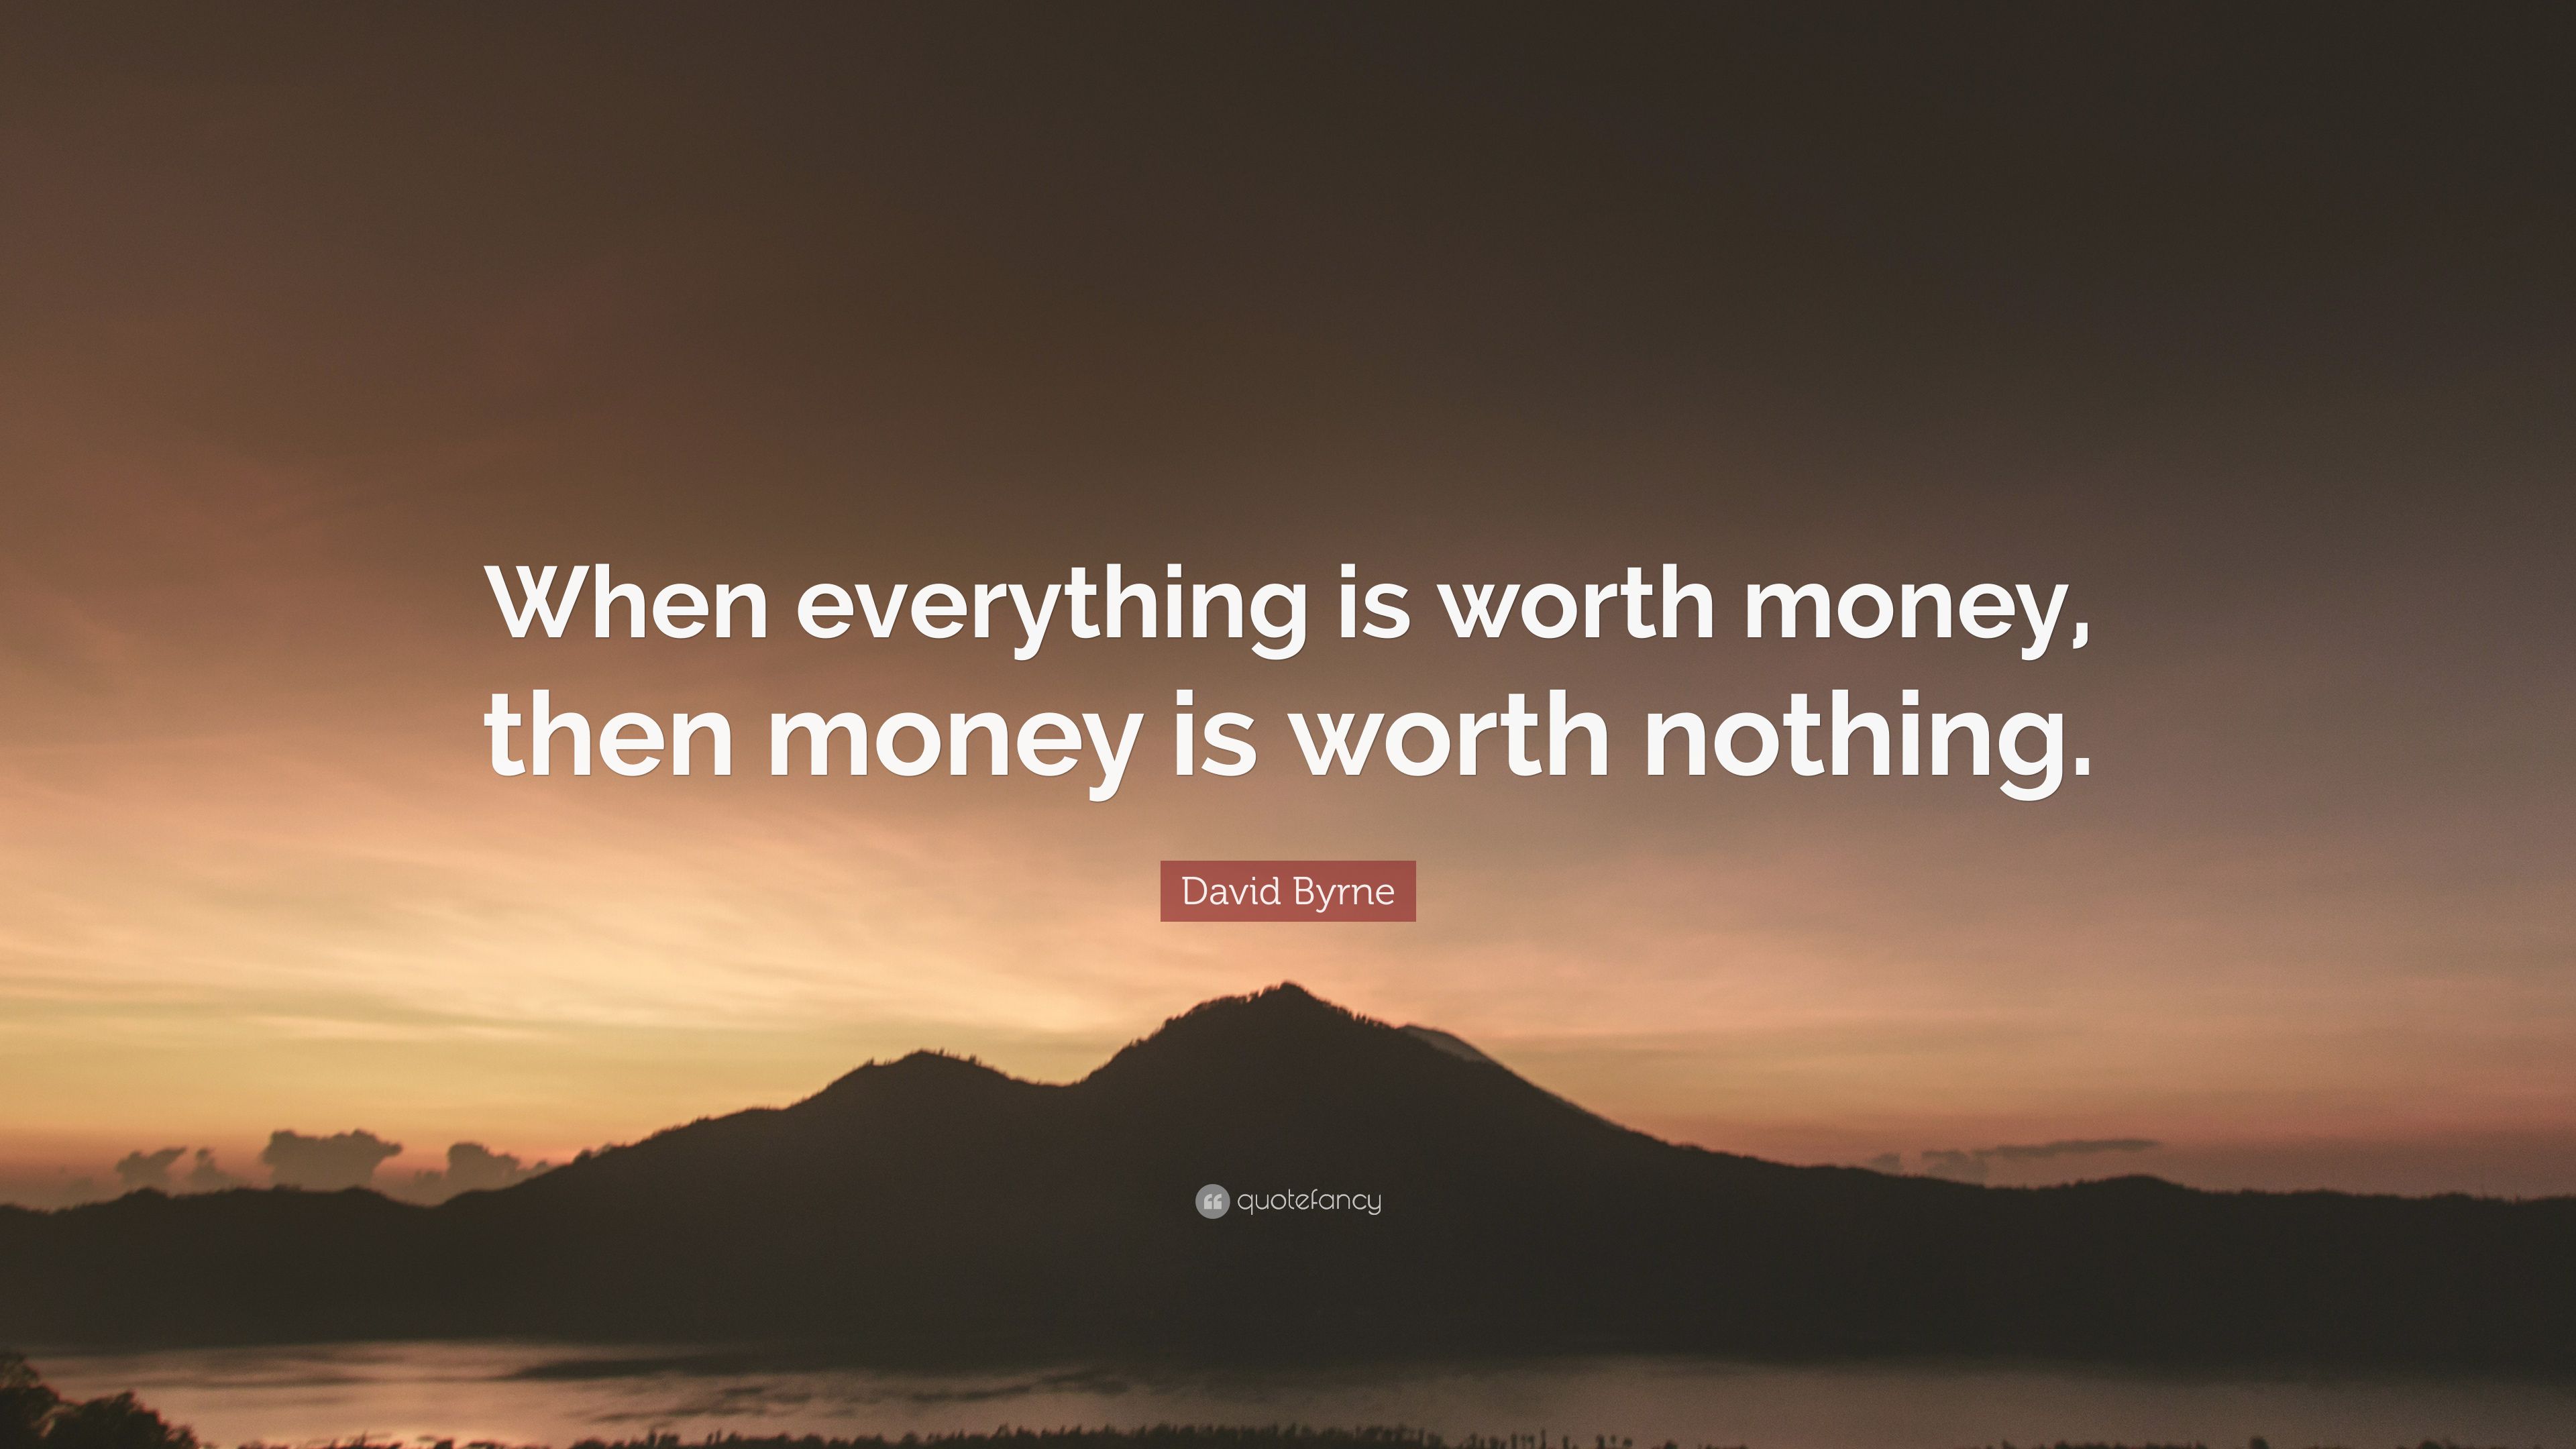 David Byrne Quote: “When everything is worth money, then money is